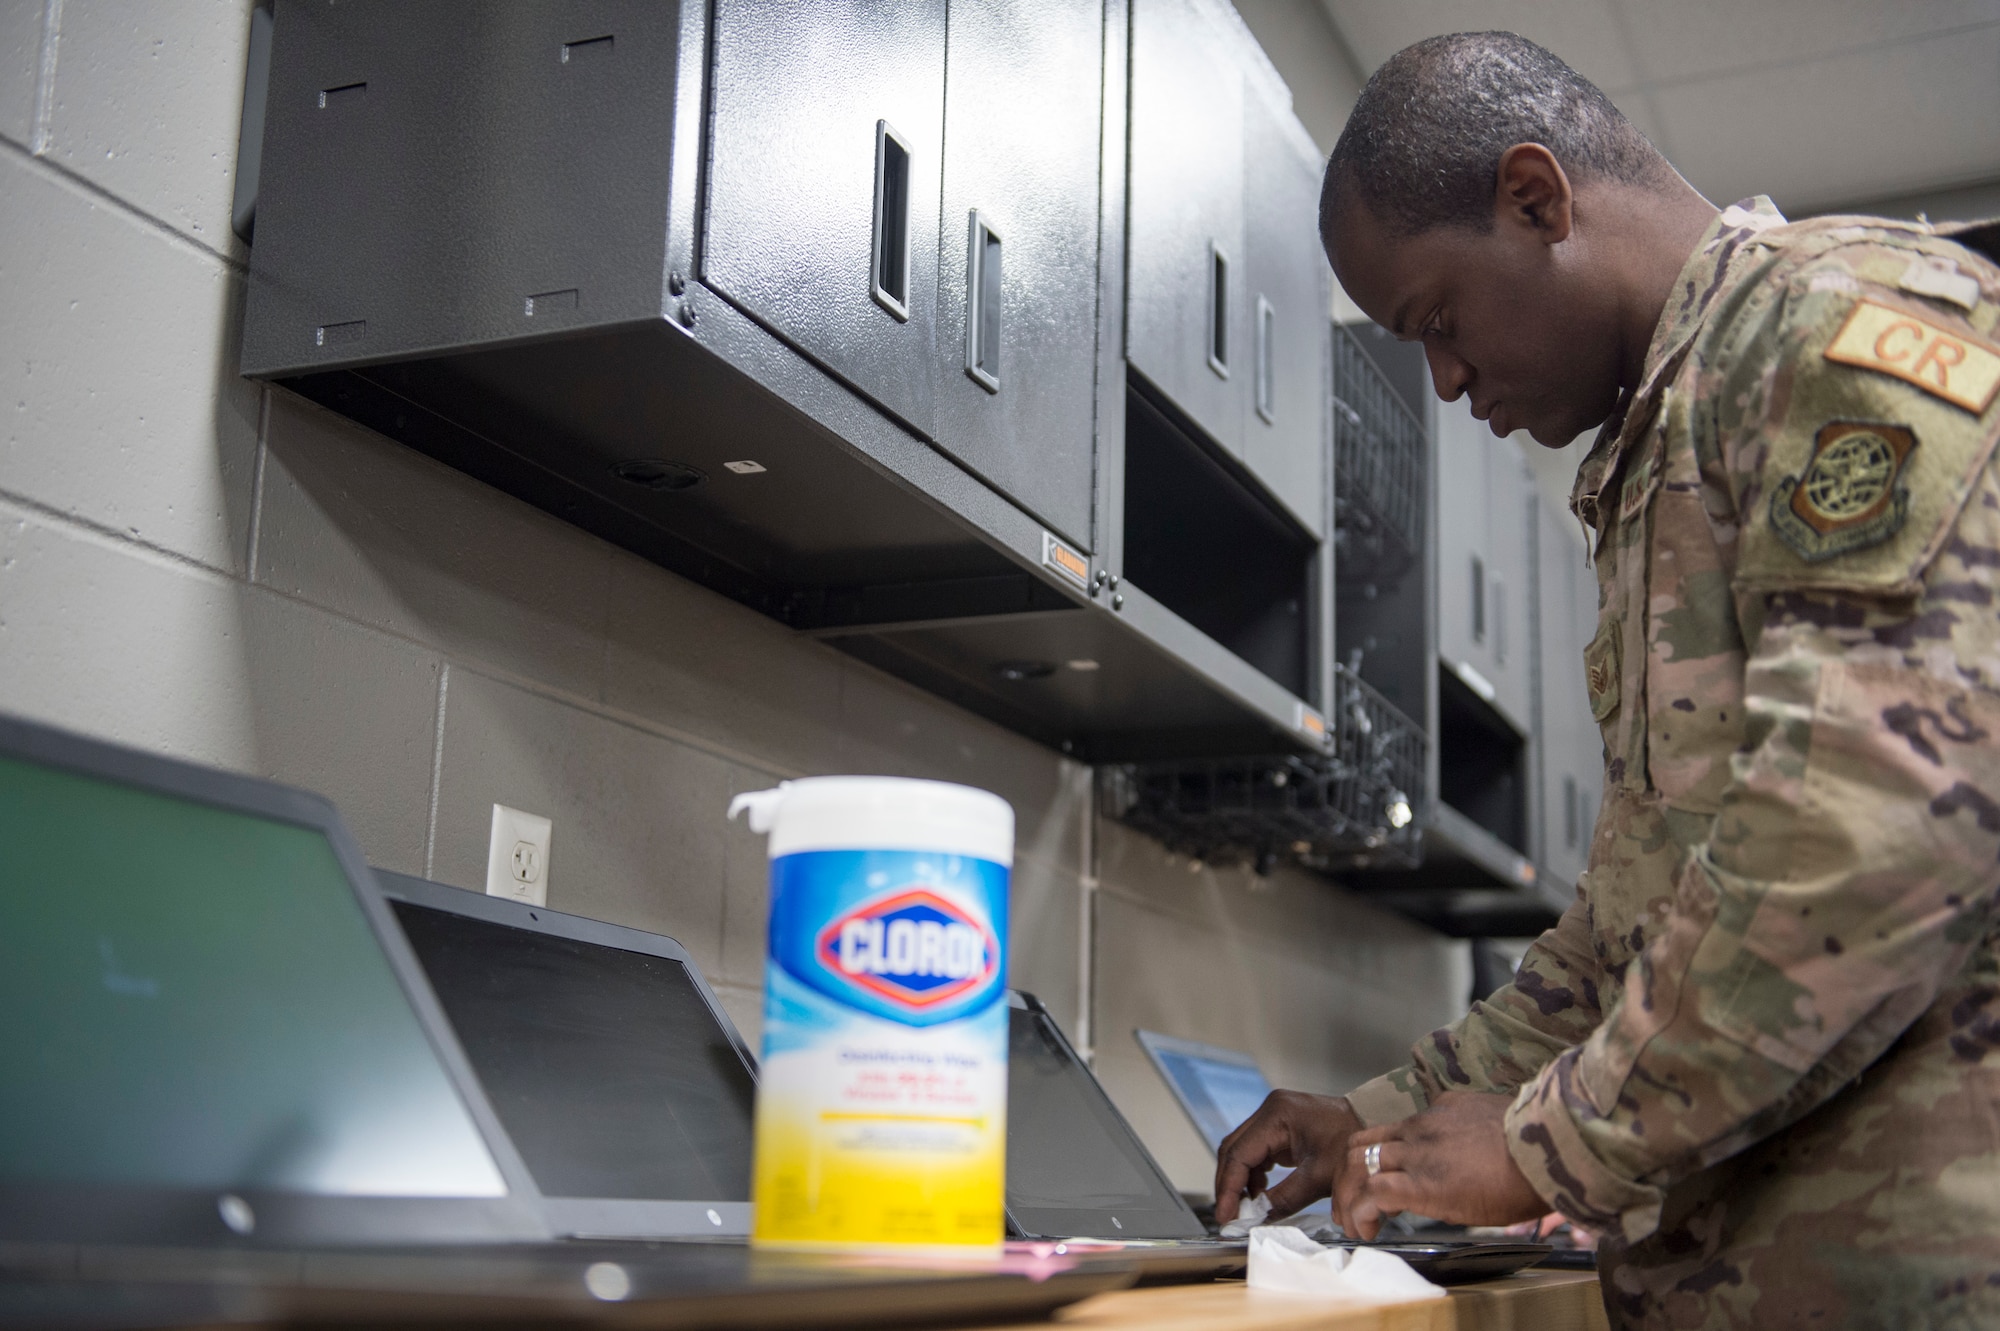 While many members of the 621st Contingency Response Wing are teleworking during COVID-19, two Airmen are still coming in to work to keep an essential part of the mission going at Joint-Base McGuire Dix Lakehurst, New Jersey.